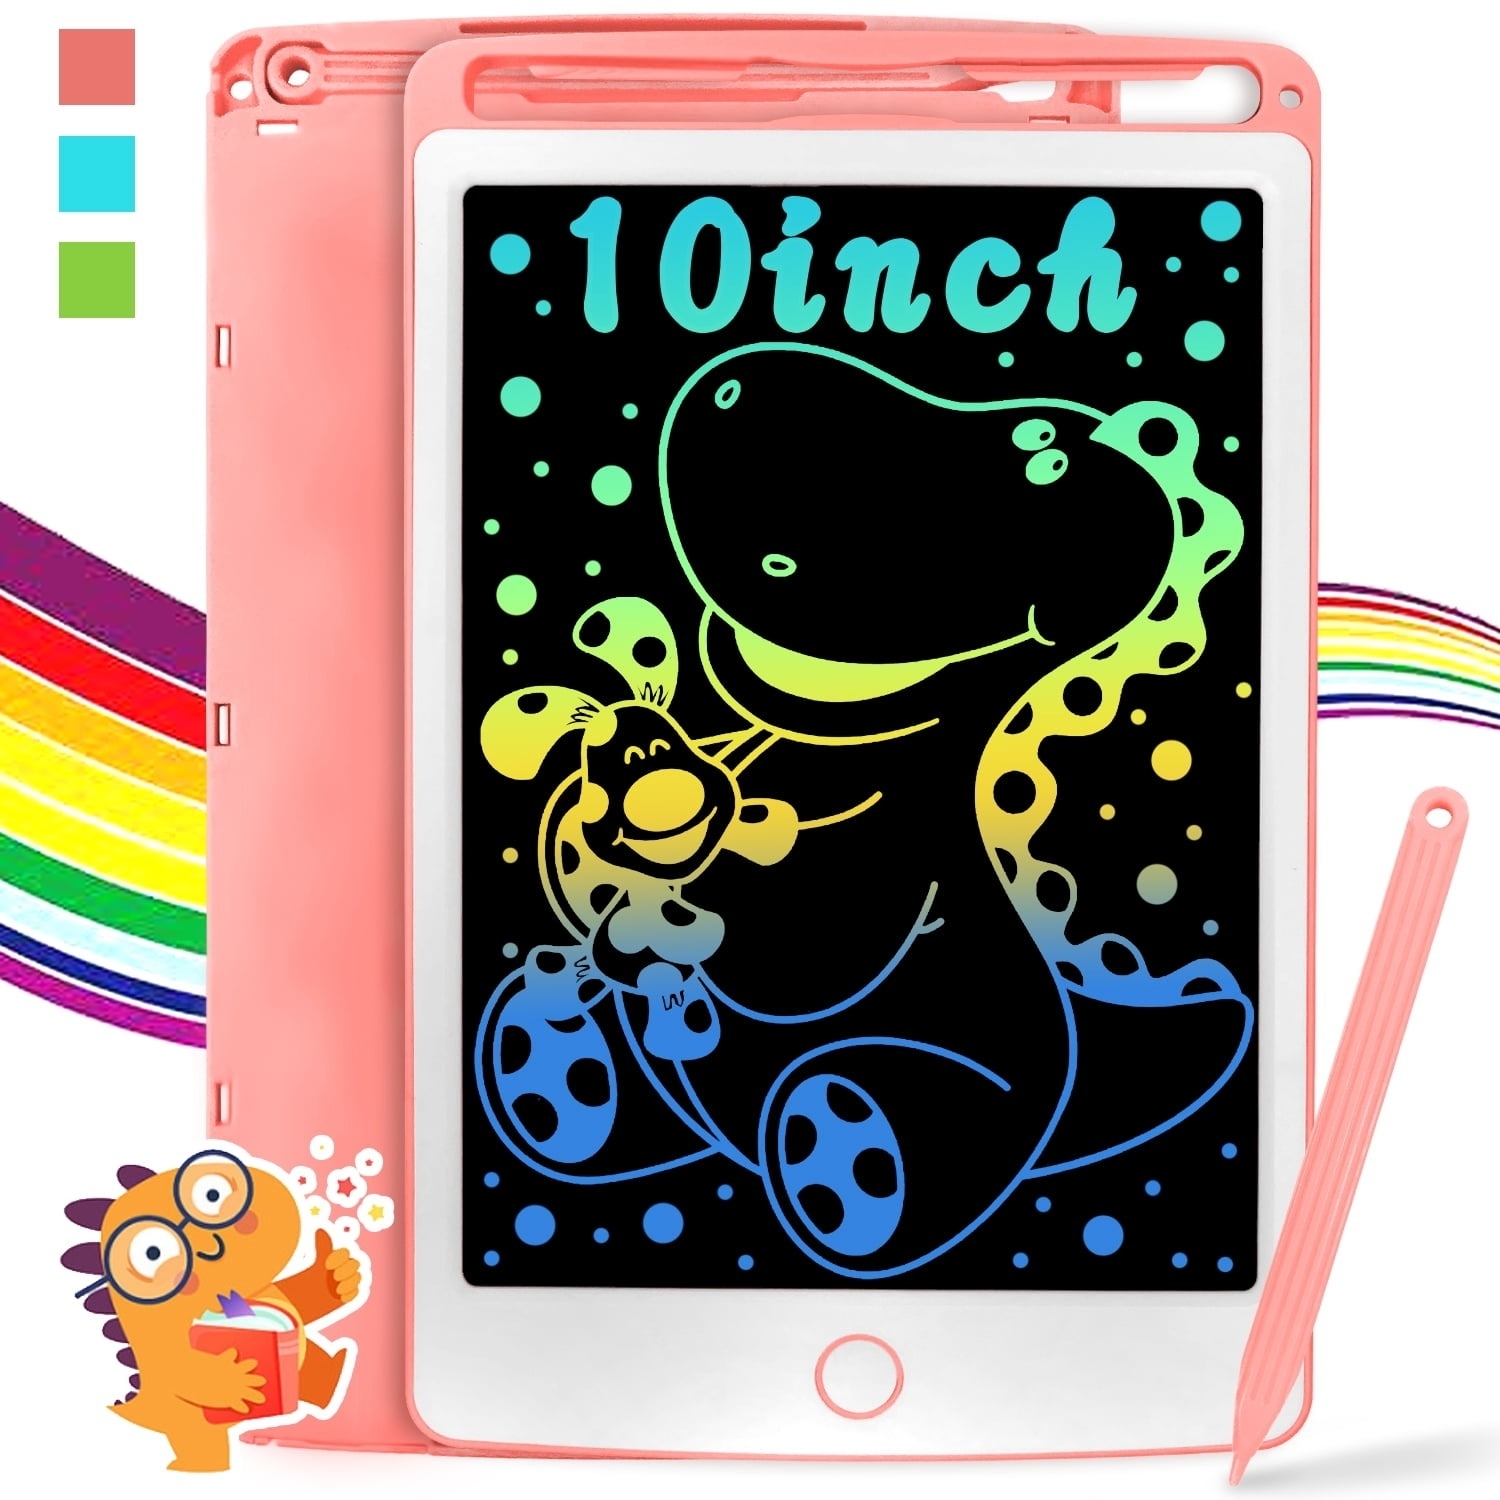 MOSTARY™ DRAWING TABLET- LCD WRITING TABLET GIFT FOR KIDS